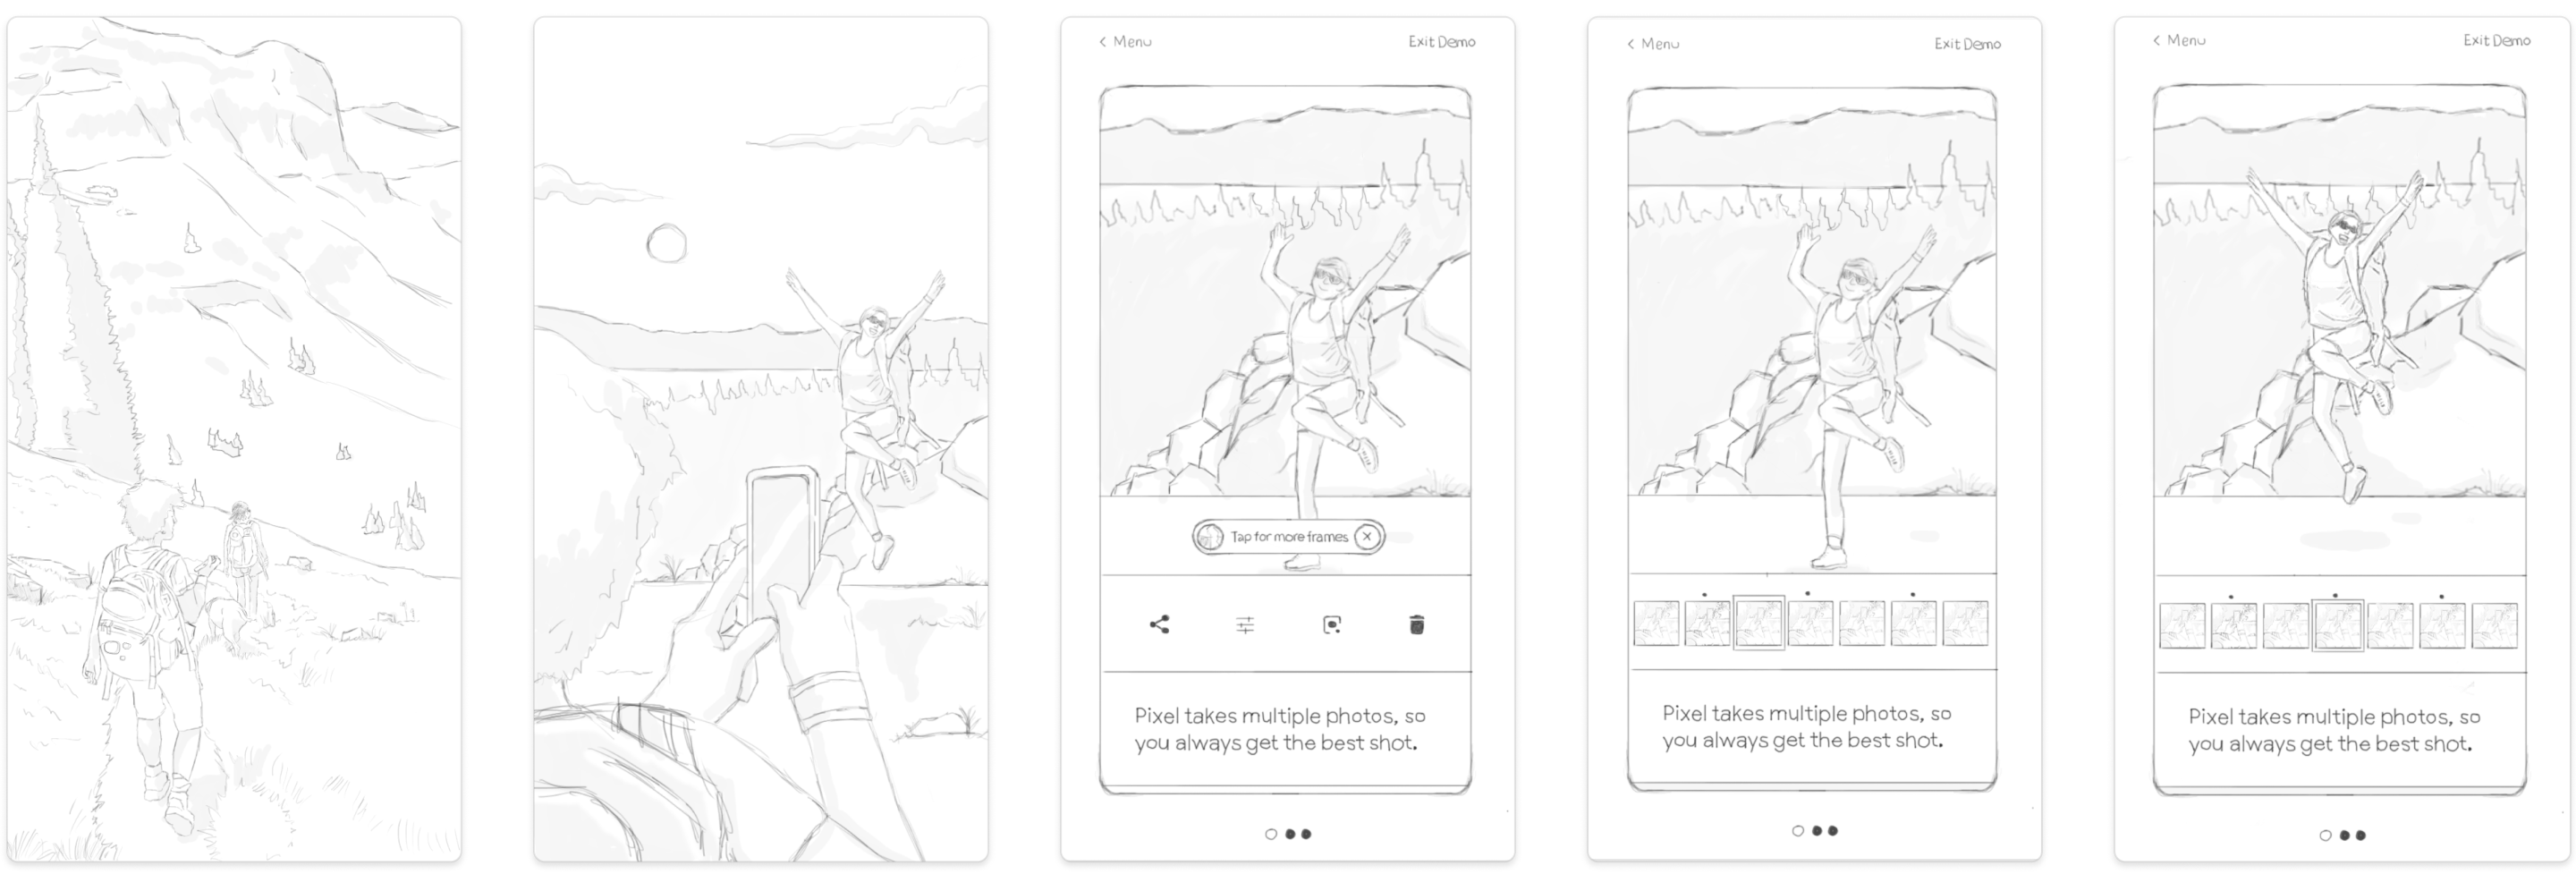 Sketched storyboard with 5 panels showing the feature video and UI video sequence of the Alternate Moments feature